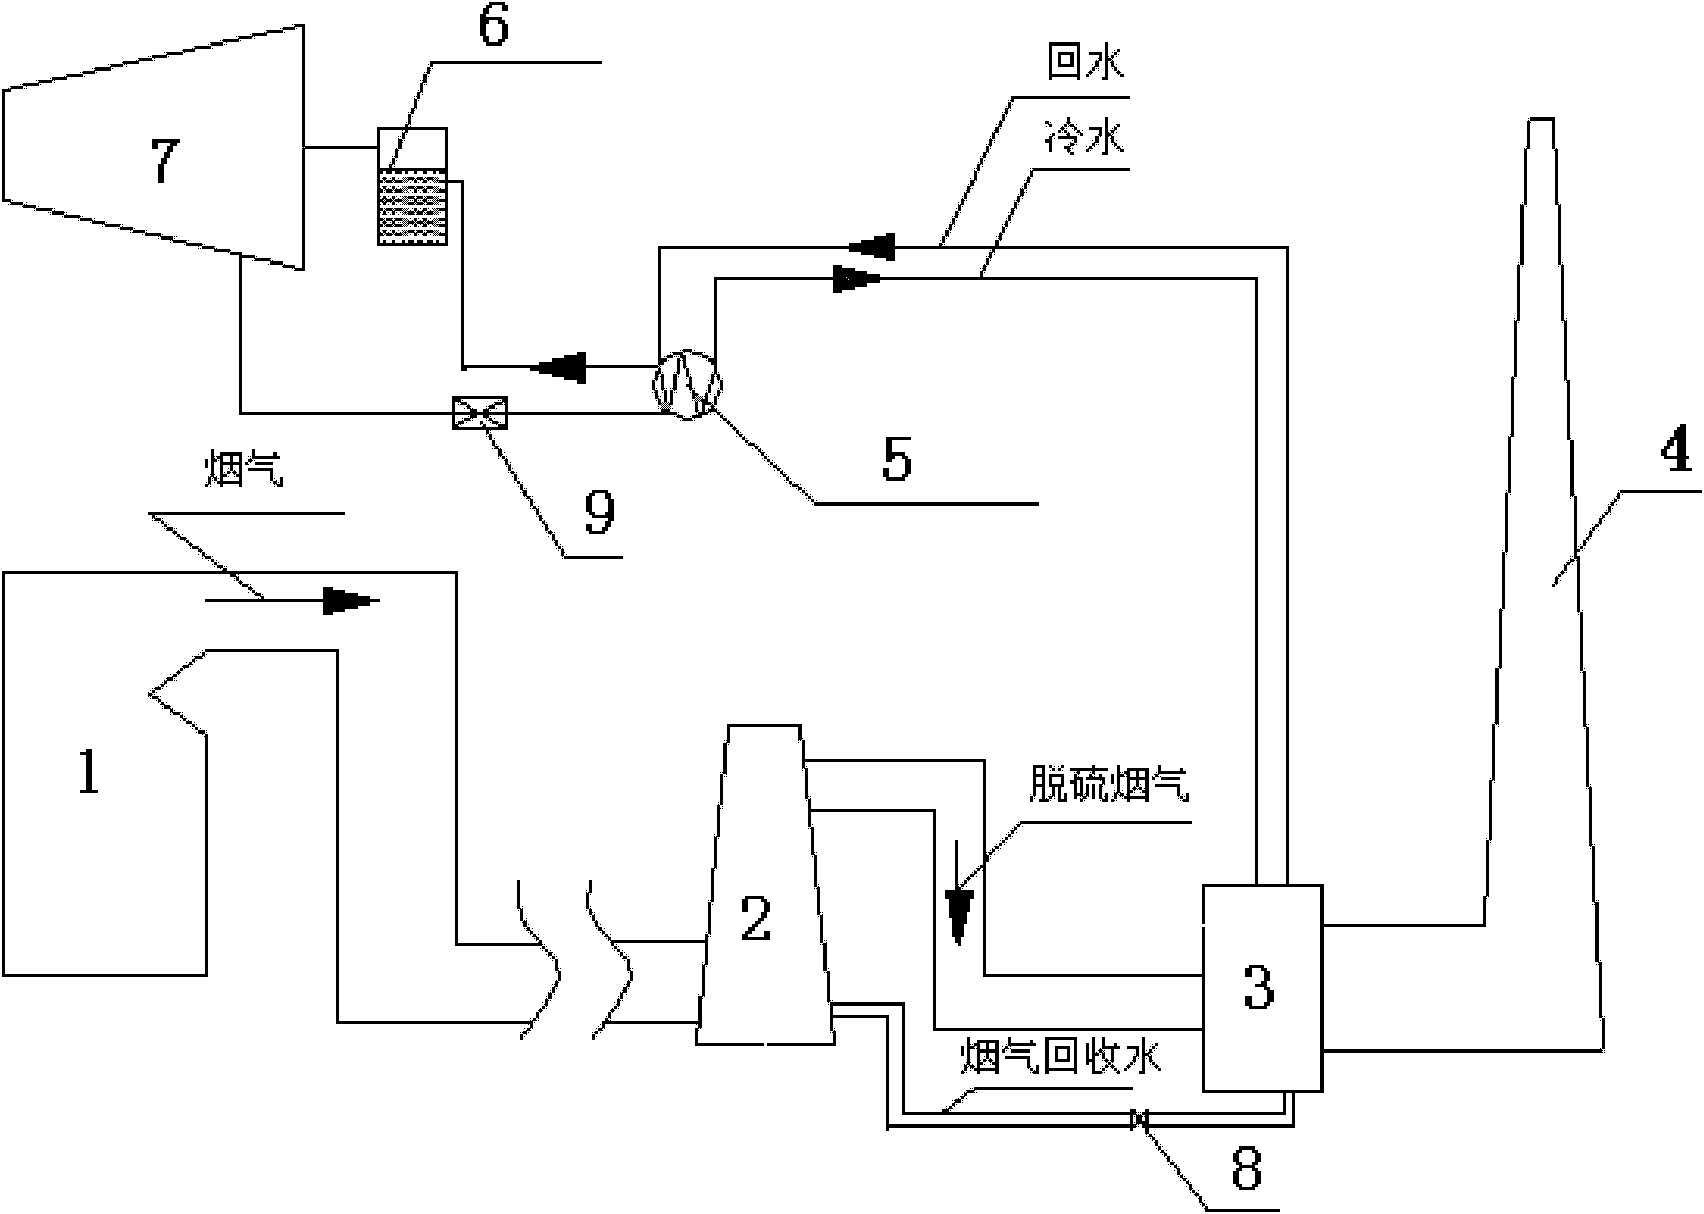 Gas exhausting and water containing system and method for lithium bromide recycling desulfurization system